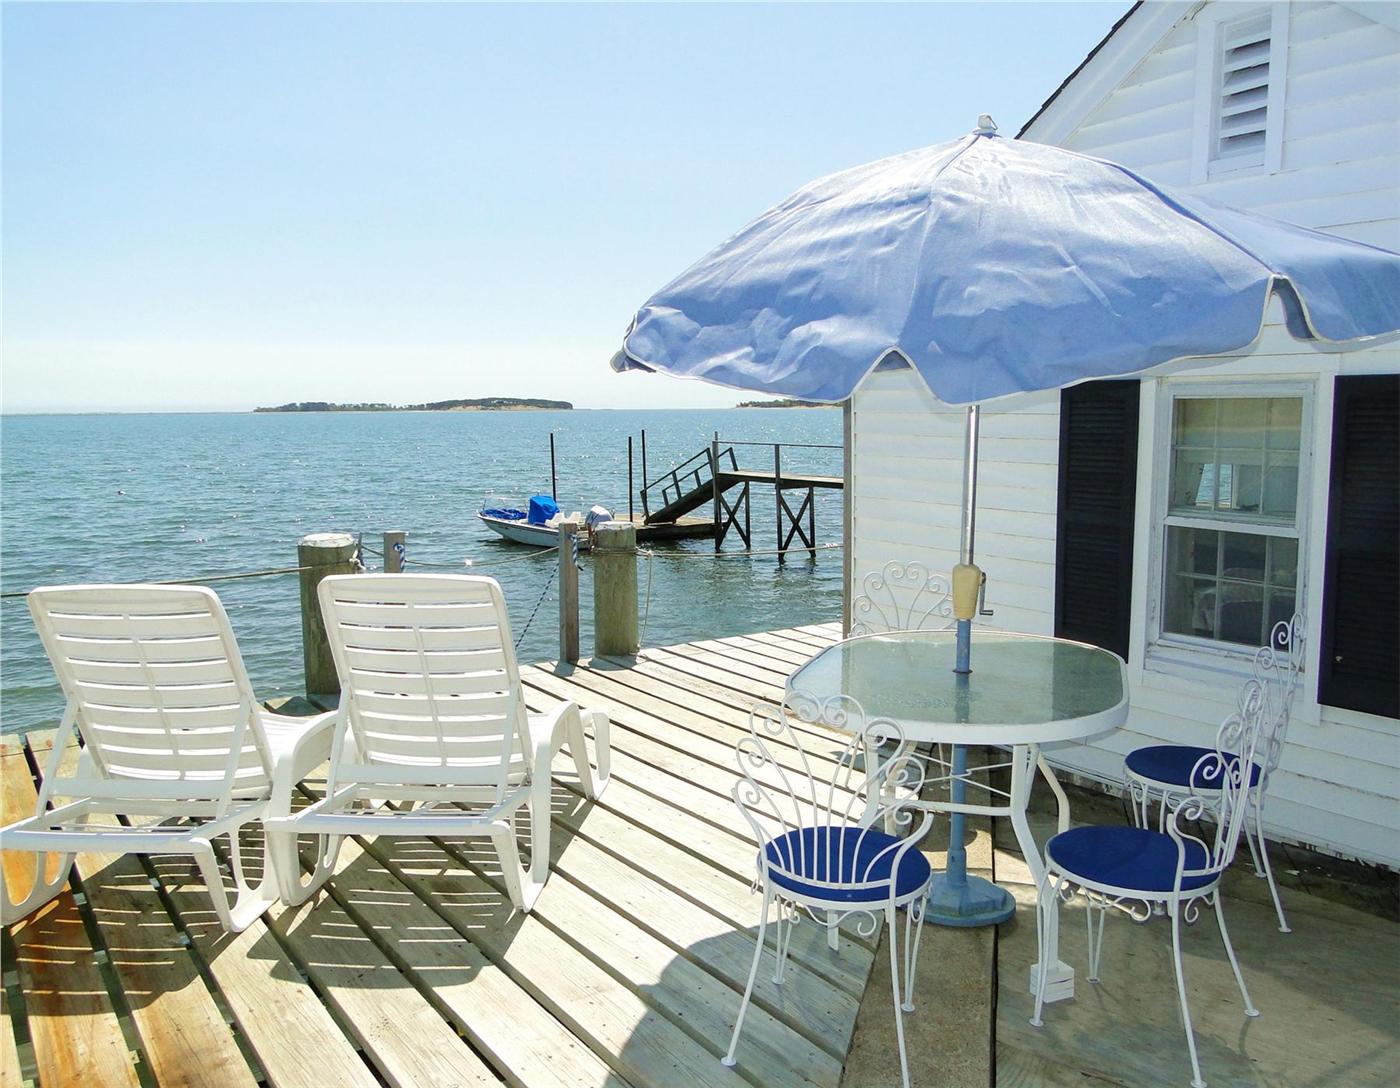 Orleans Vacation Rental home in Cape Cod MA 02653 Swim 